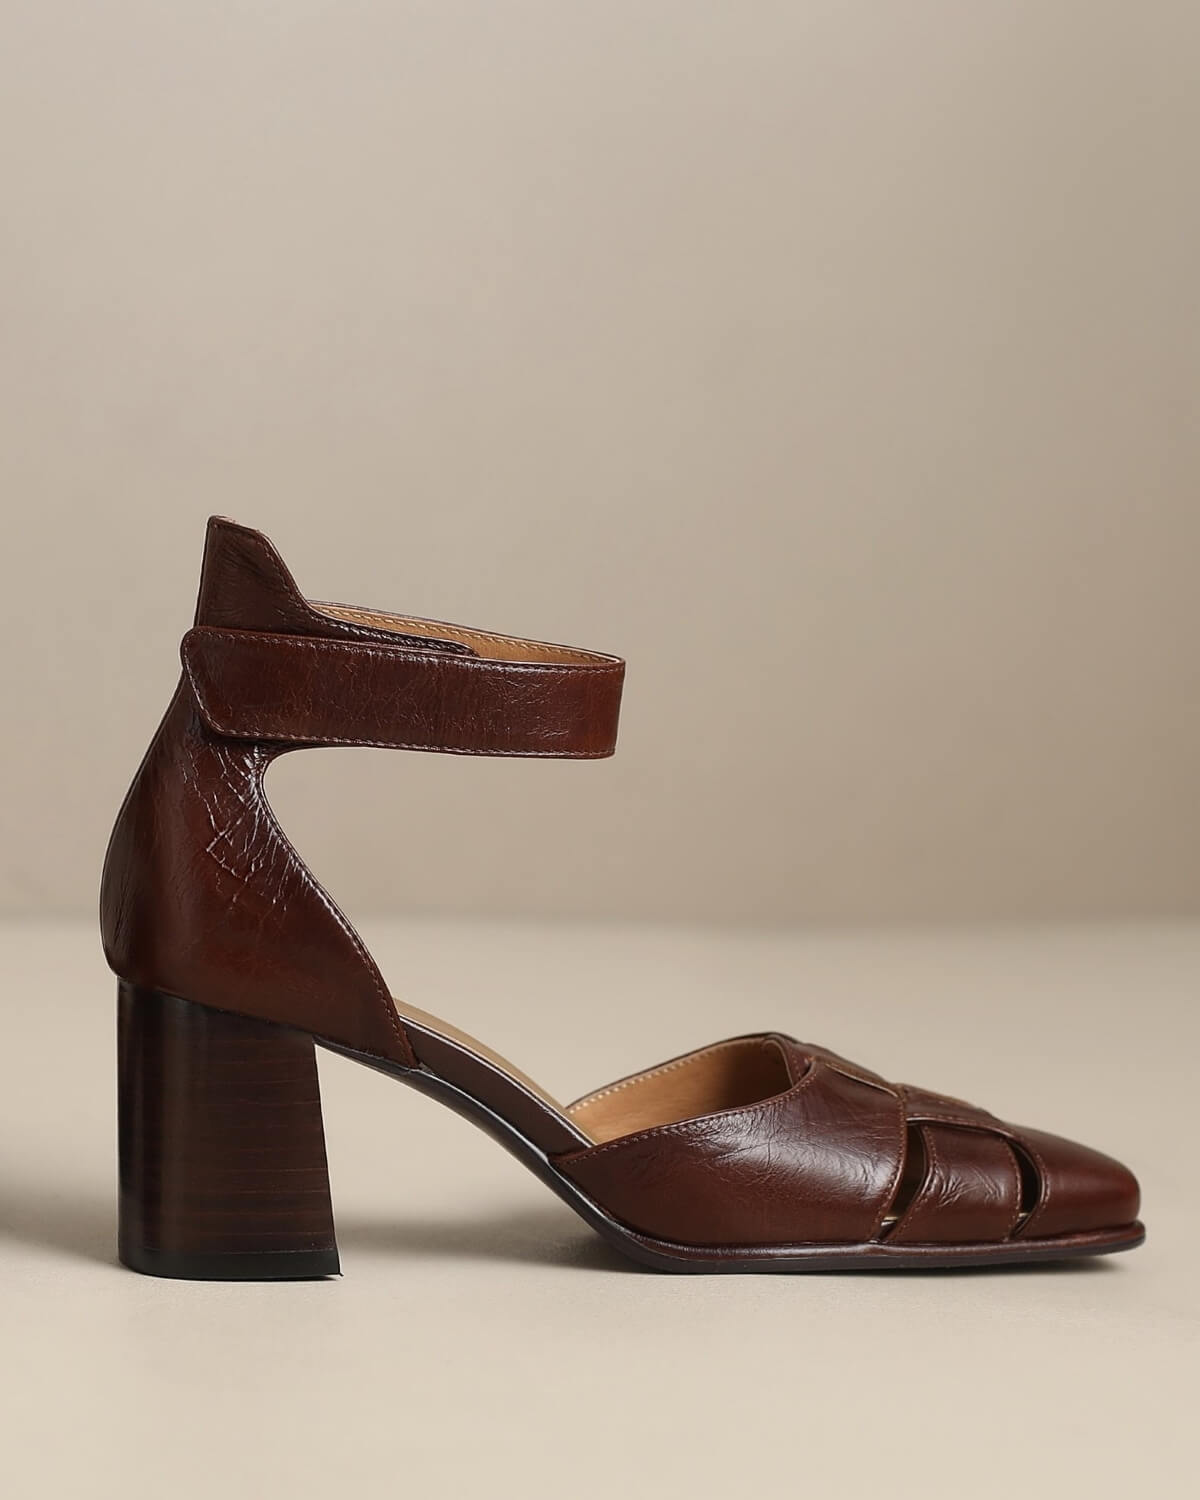 Verna-Square-Toe-Brown-Leather-Ankle-Strap-Heels-1